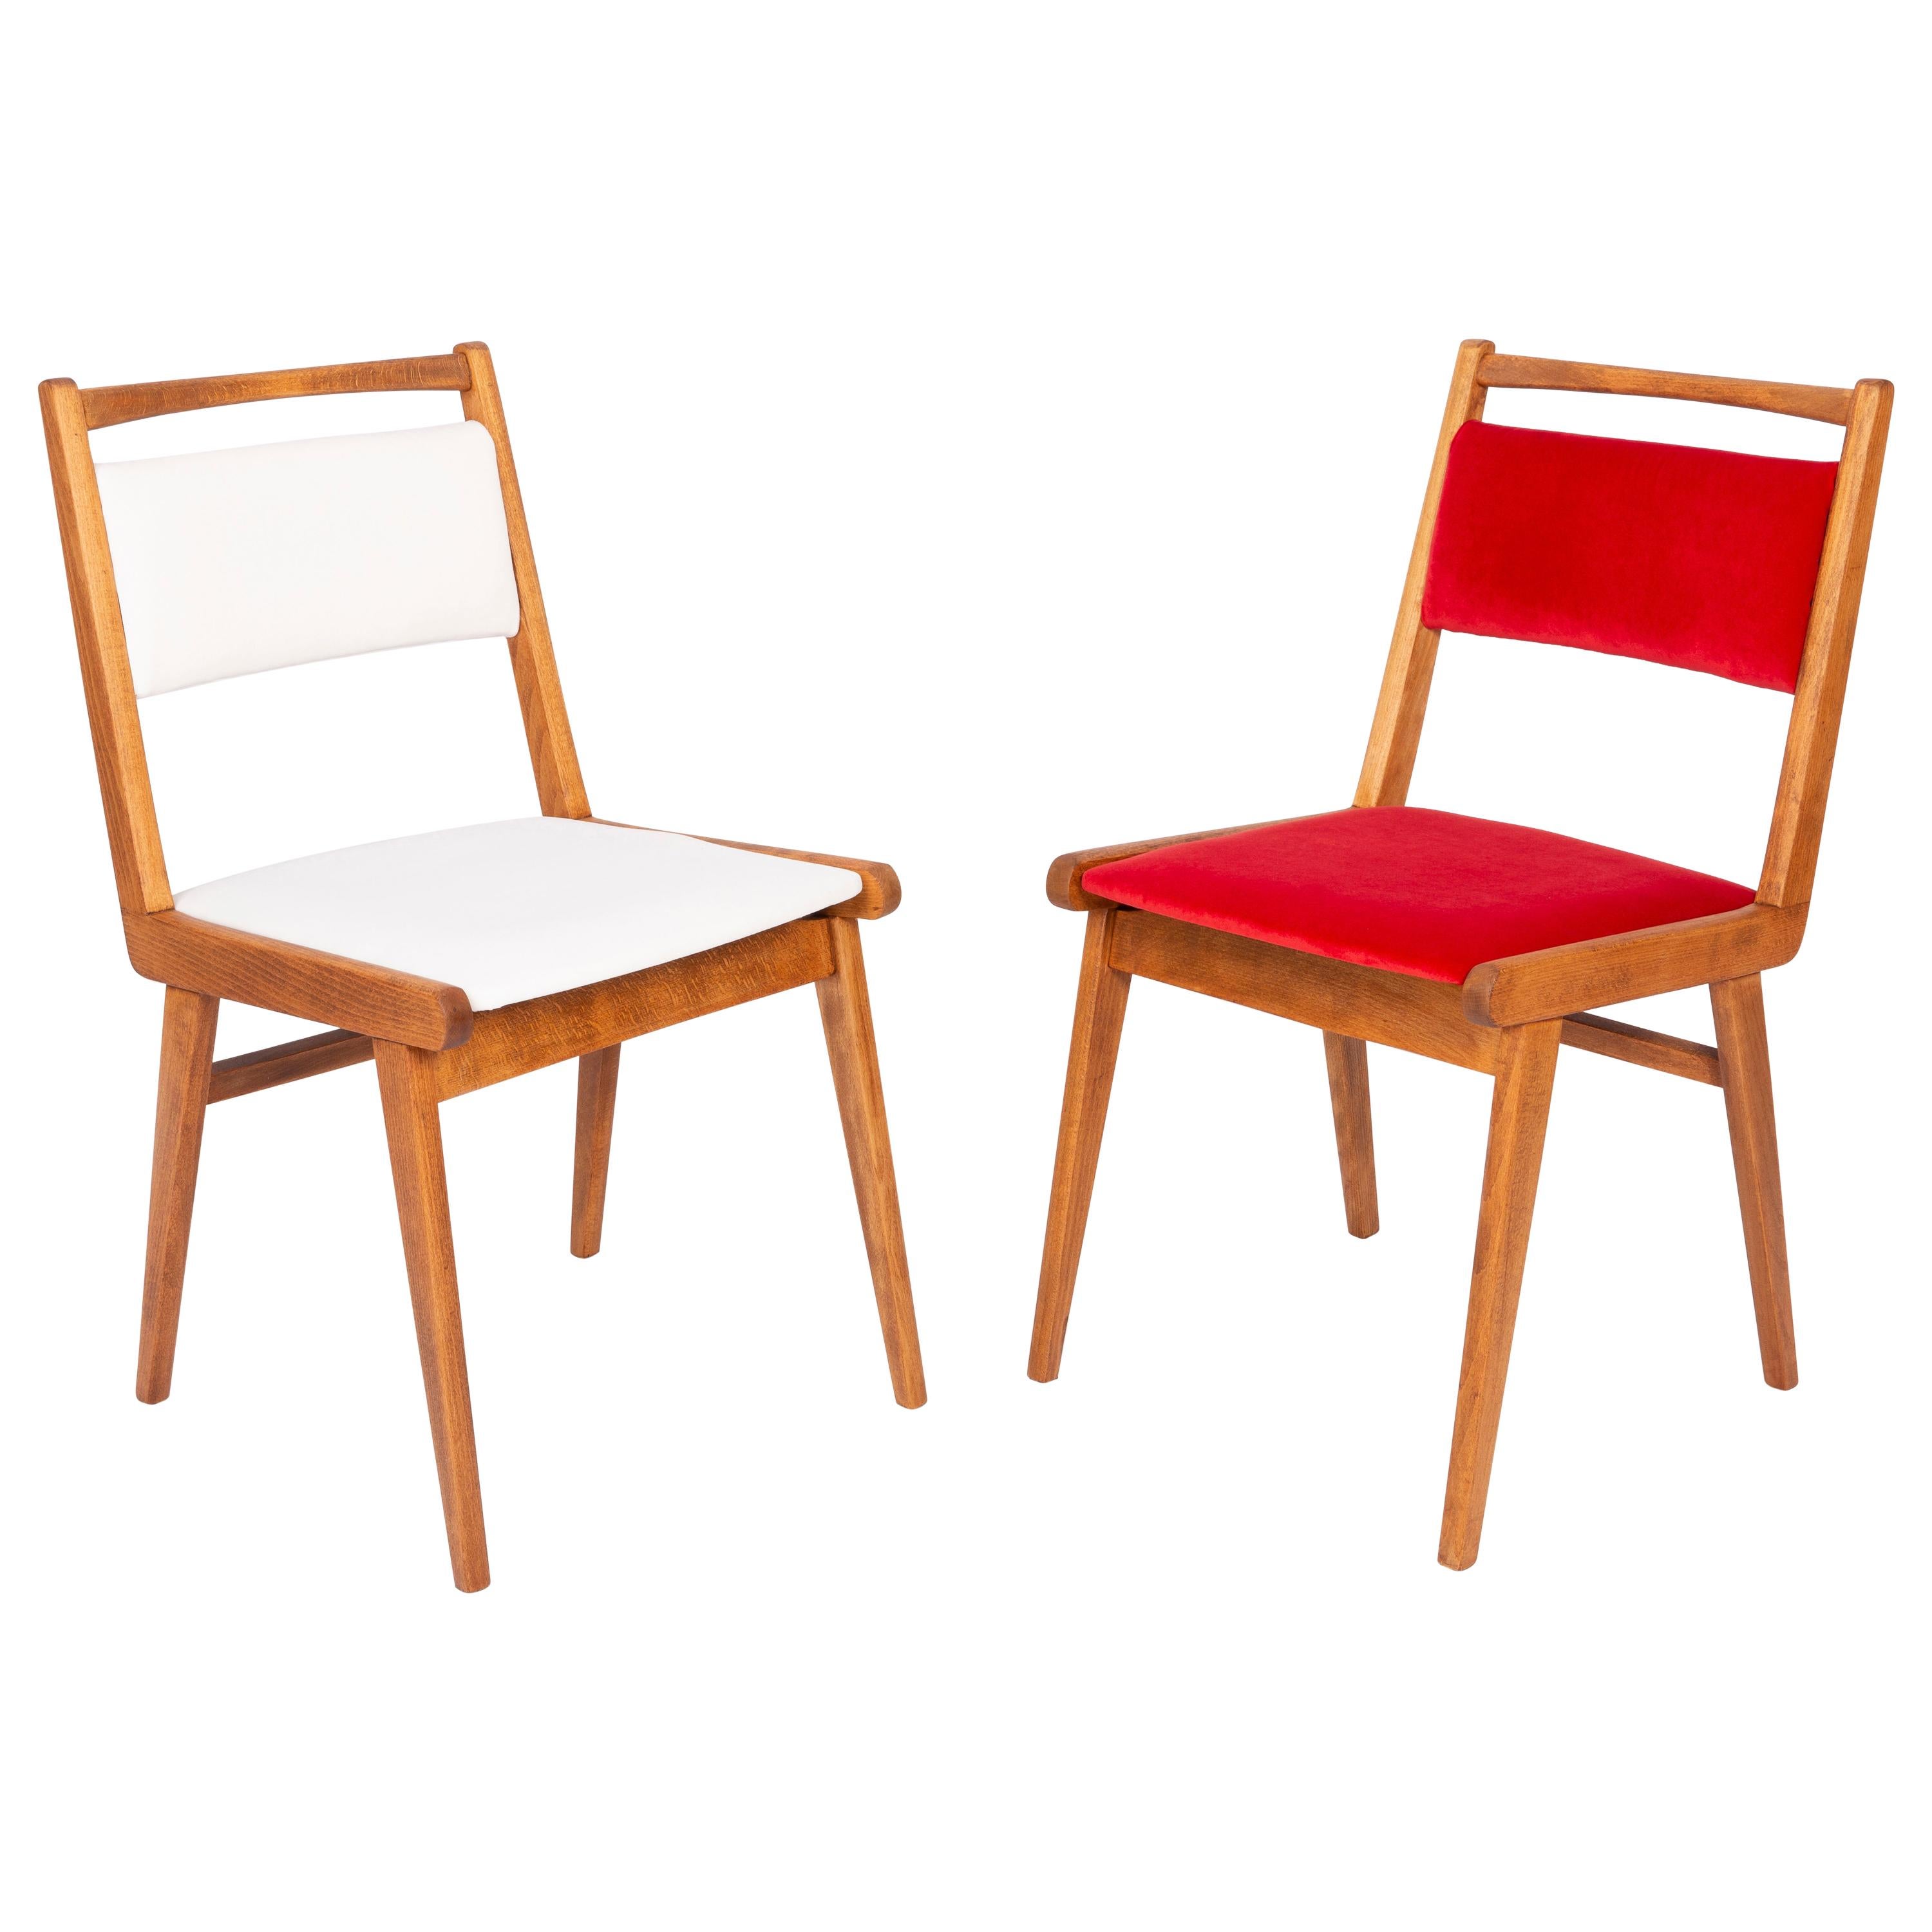 Set of Two 20th Century White and Red Velvet Chairs, Poland, 1960s For Sale